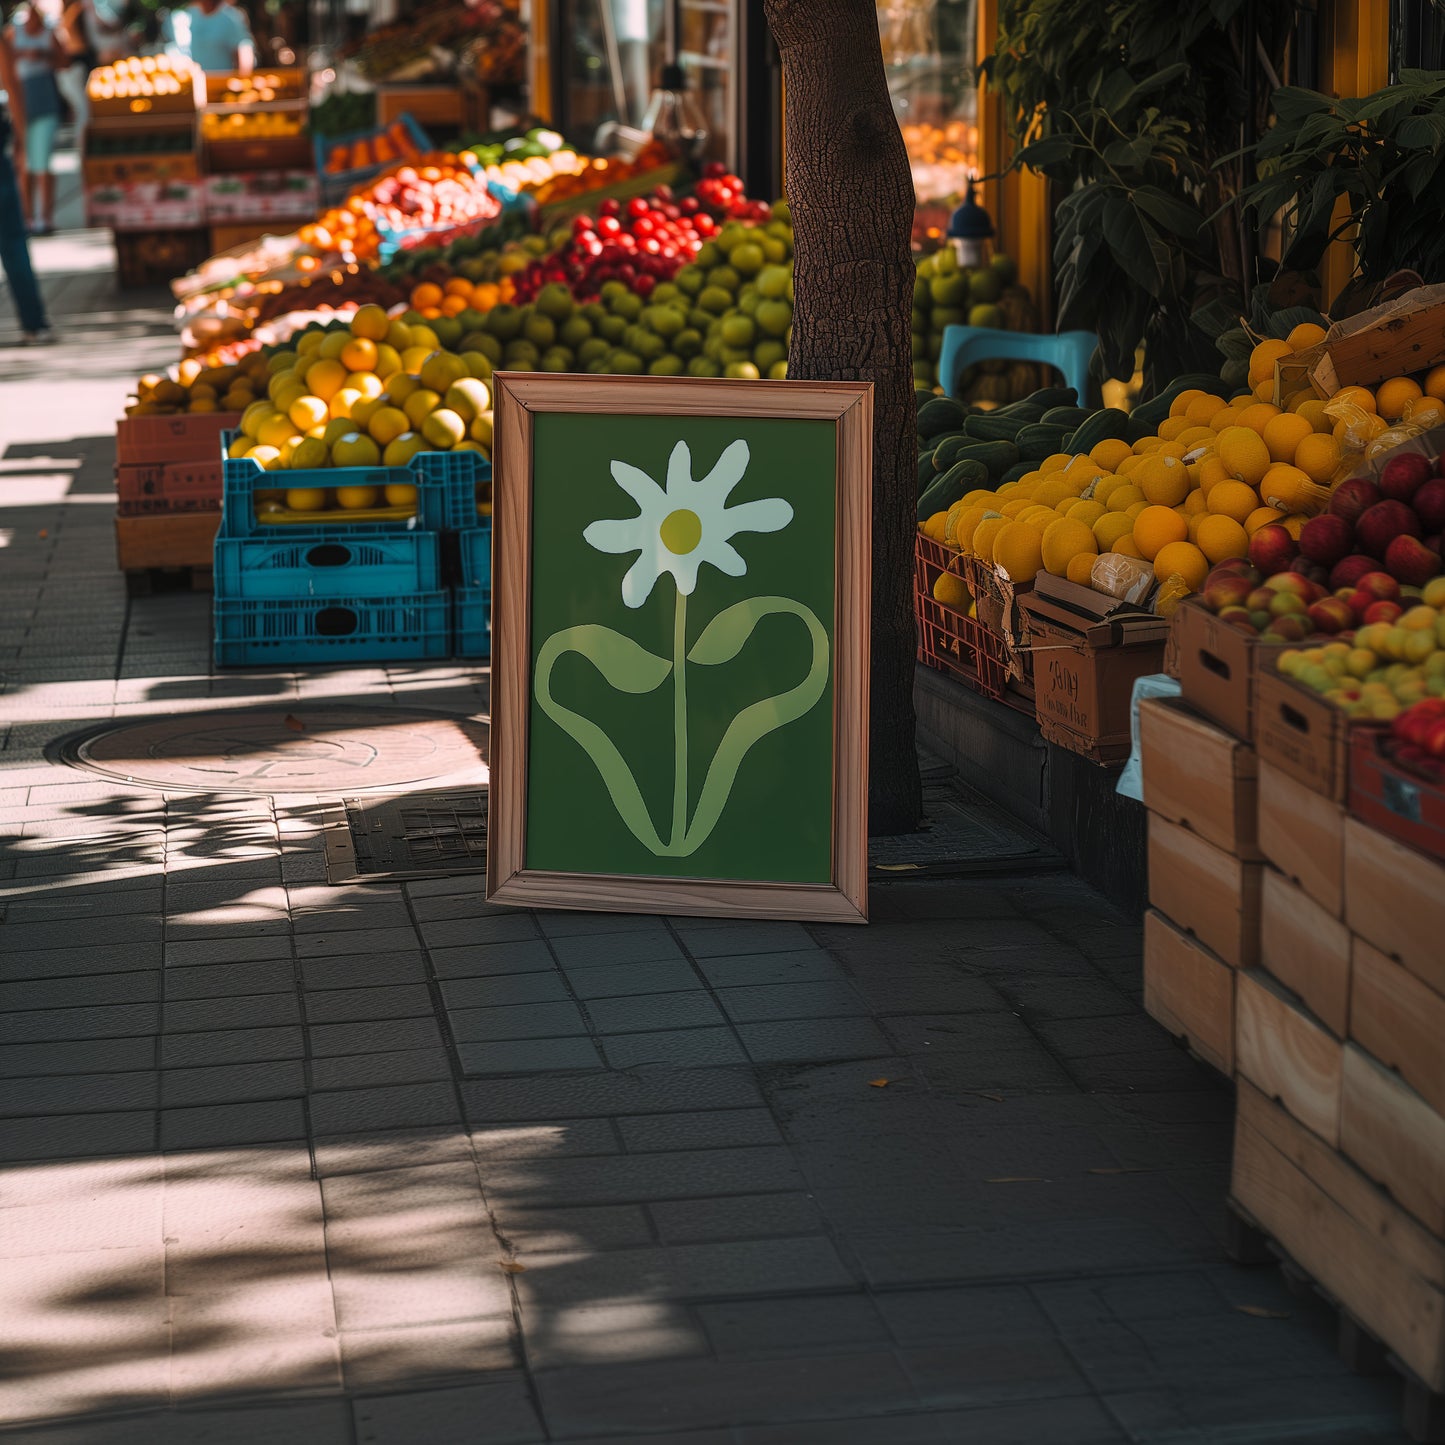 A framed picture of a flower on a sidewalk near a fruit stand.